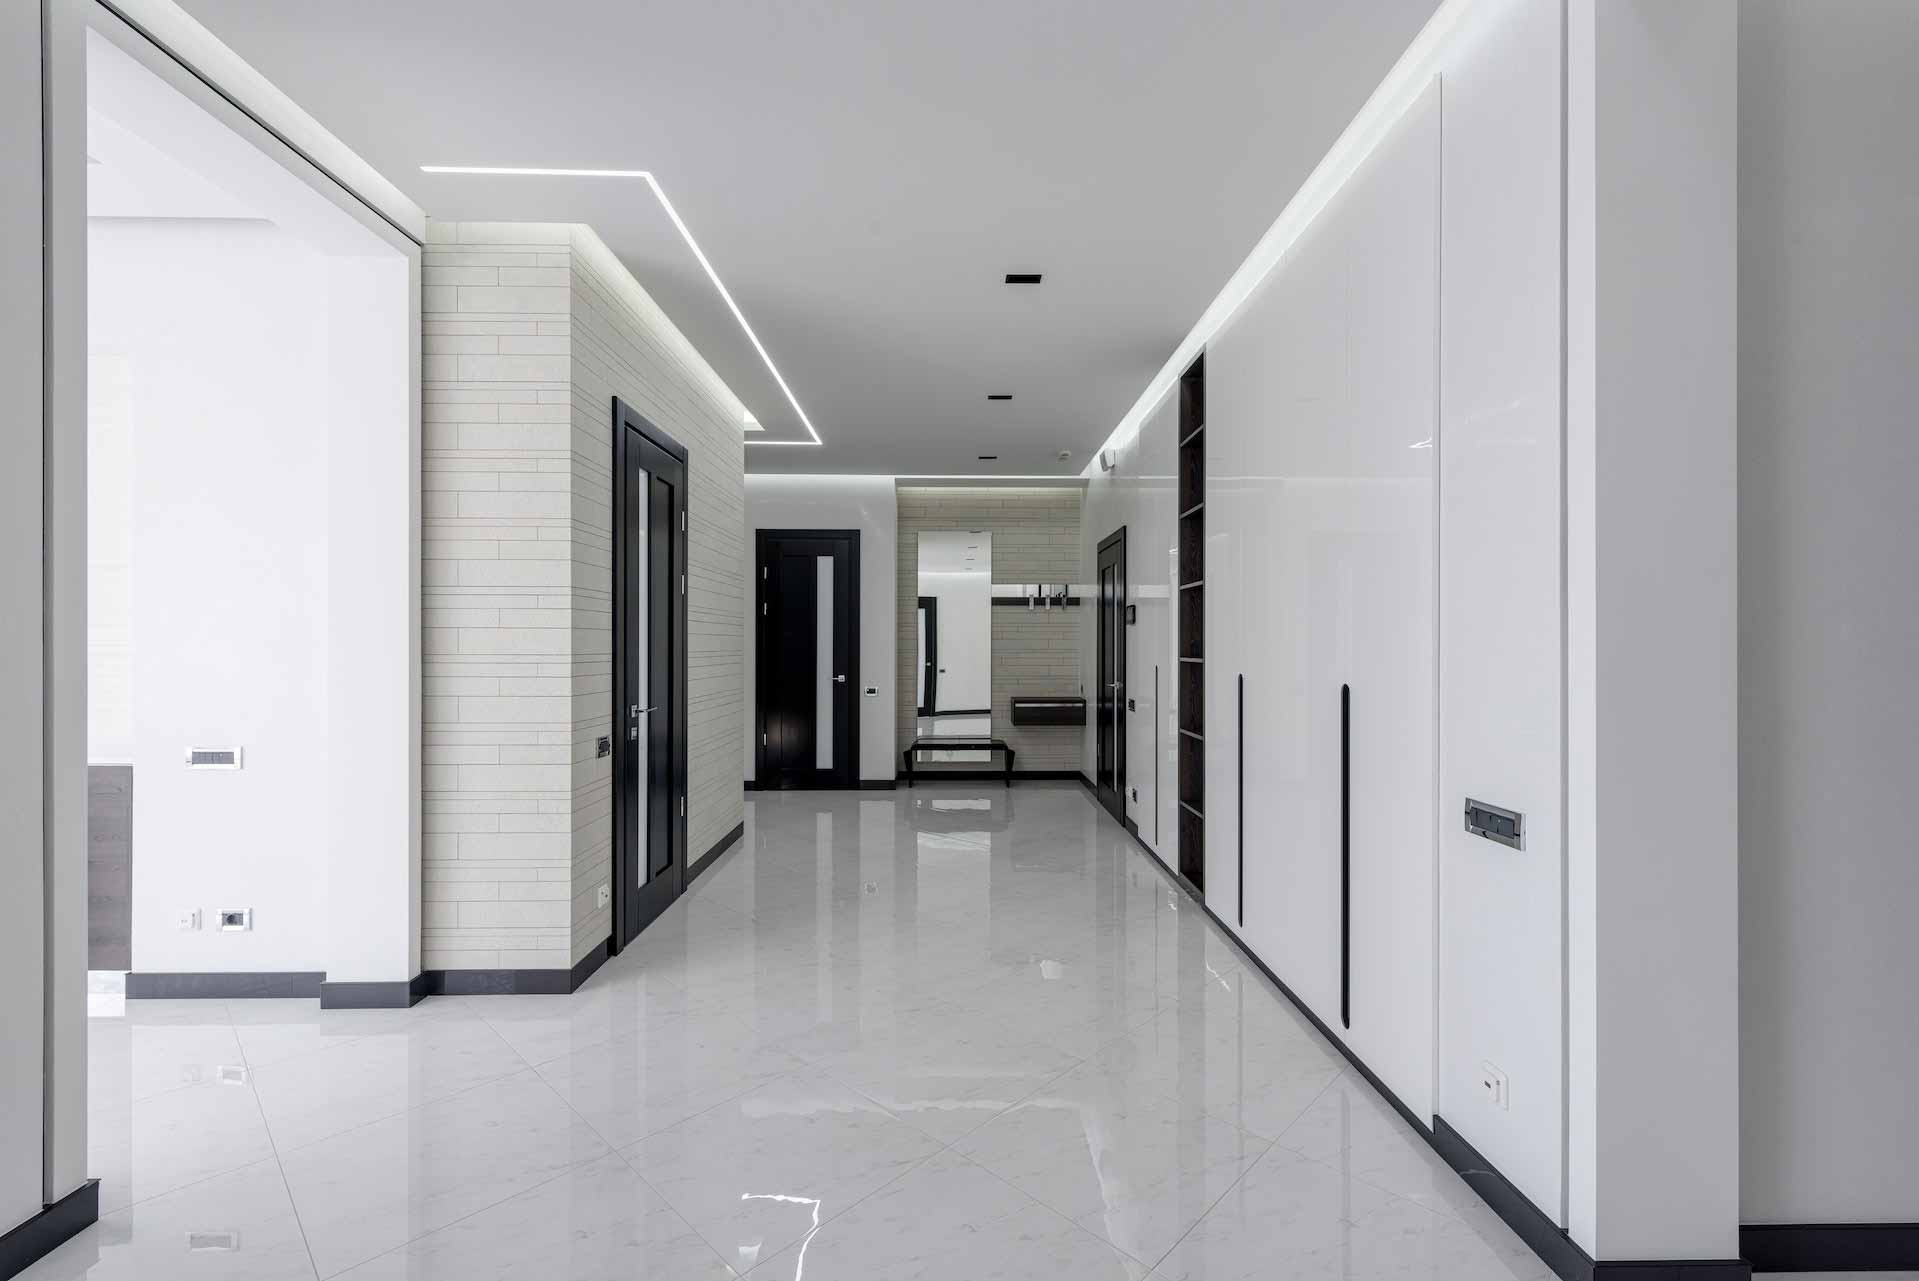 Modern building with clean VCT floor